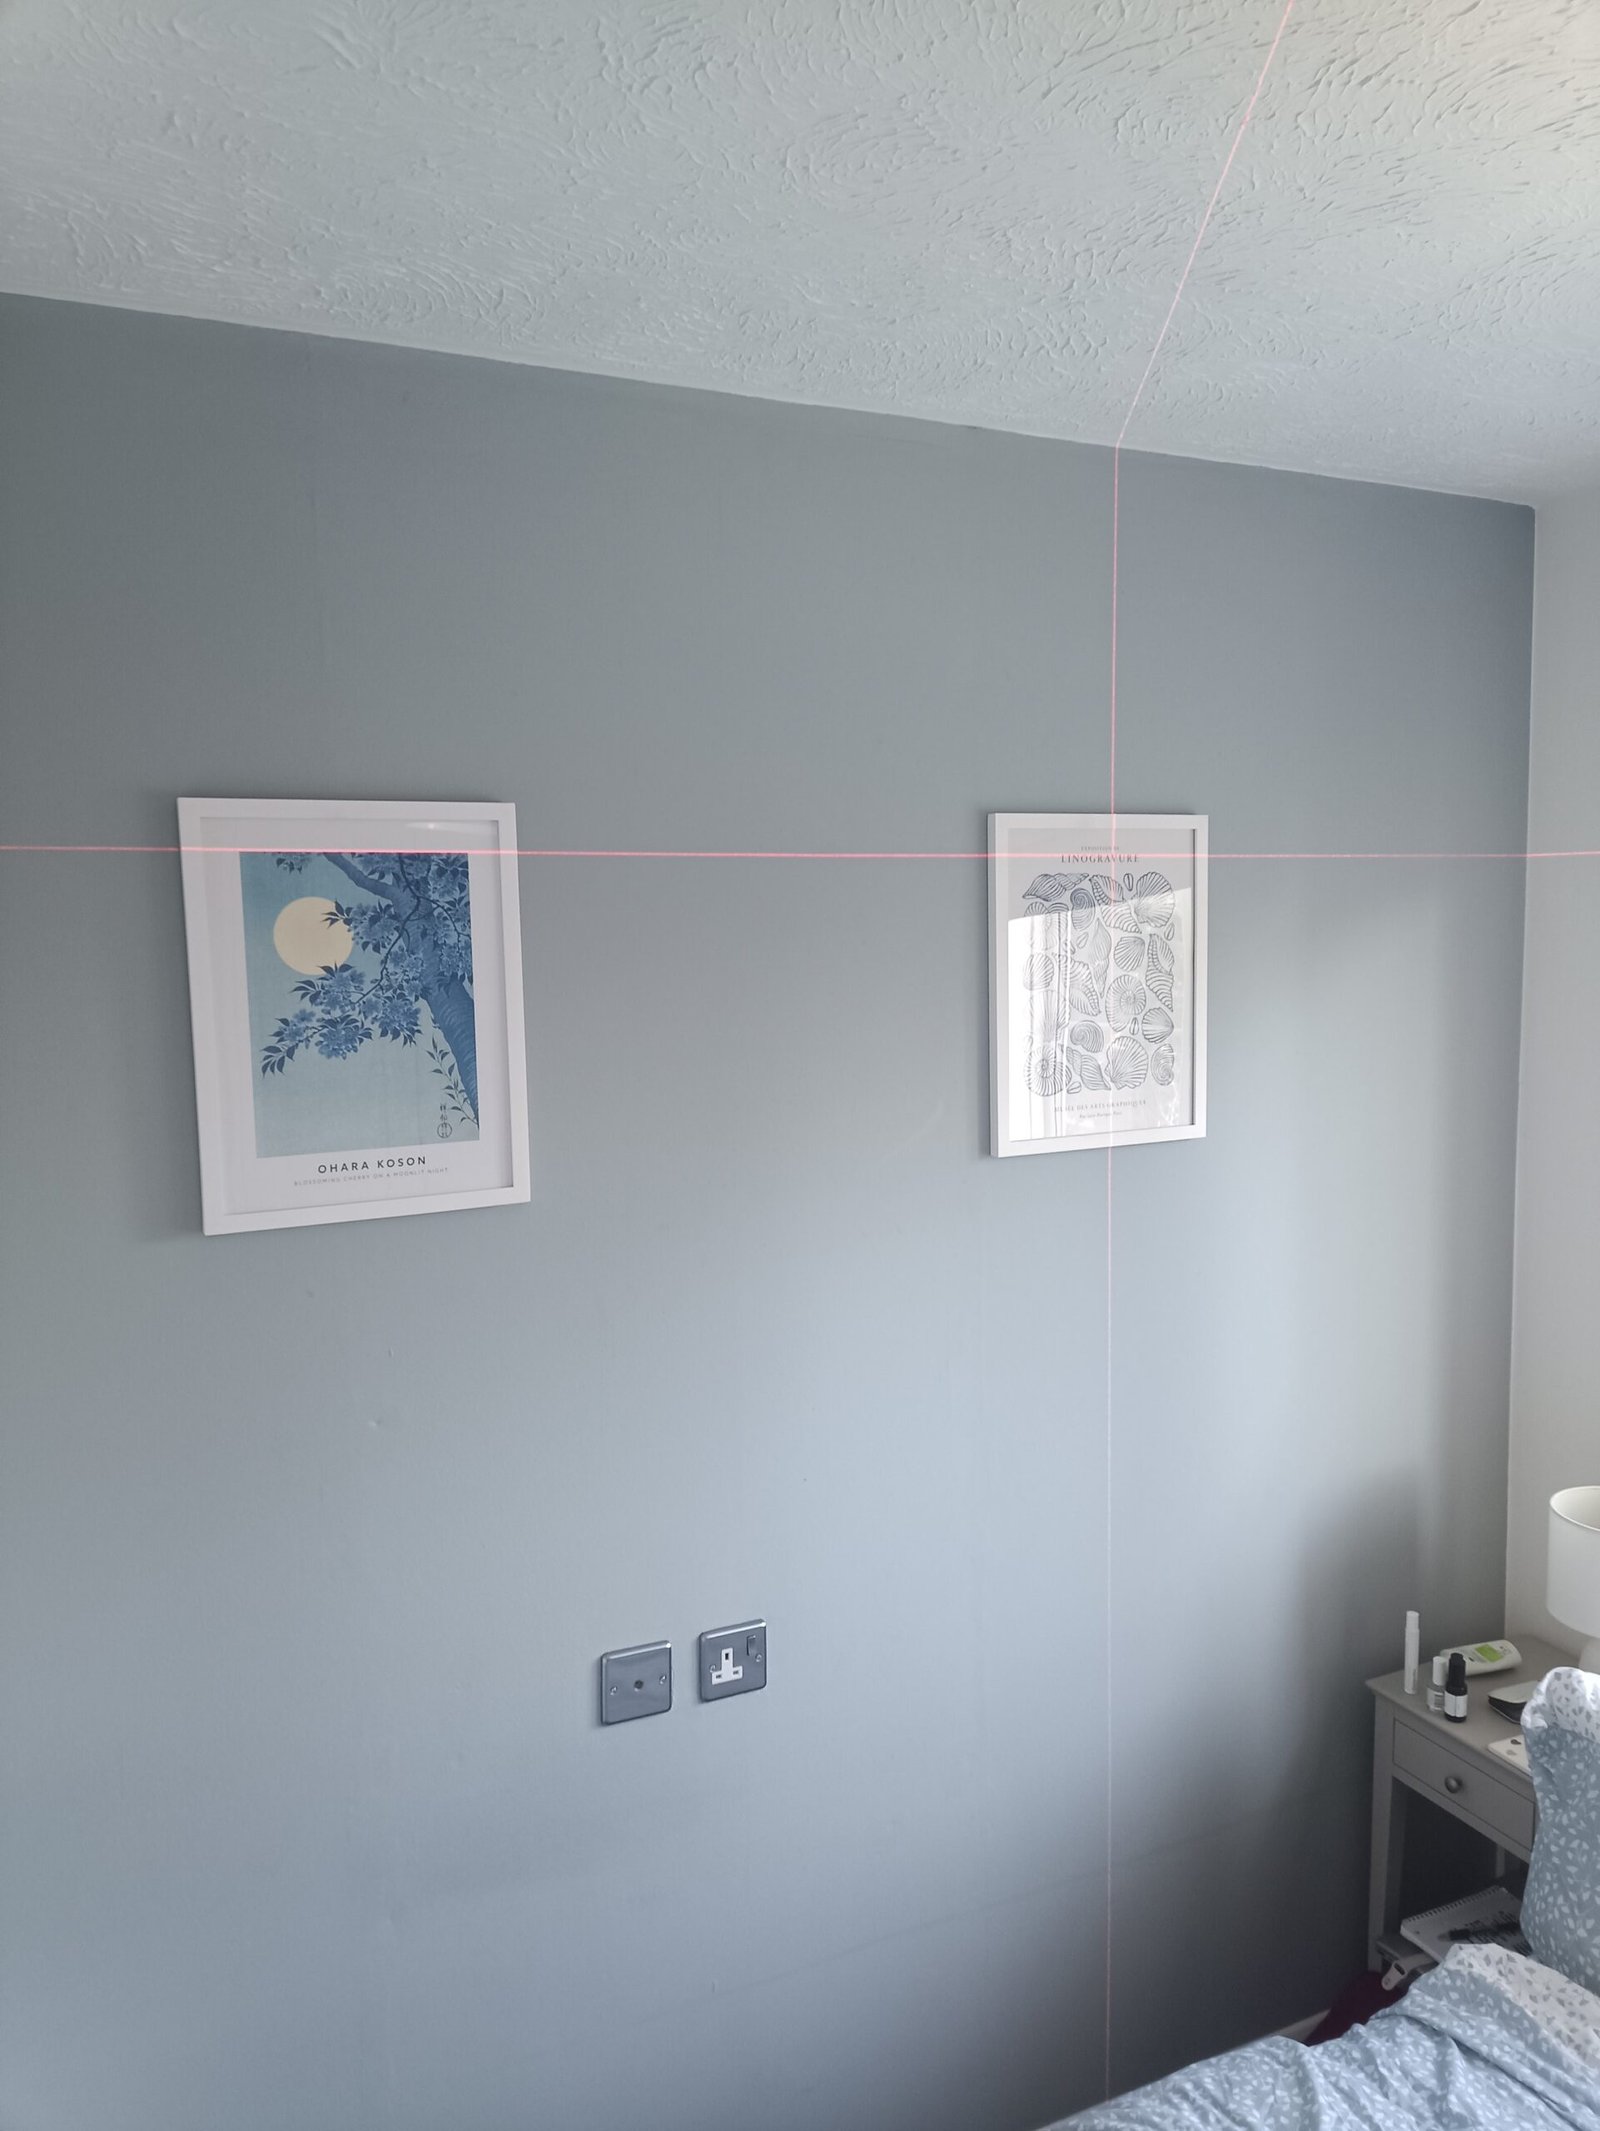 Picture hang using a laser level